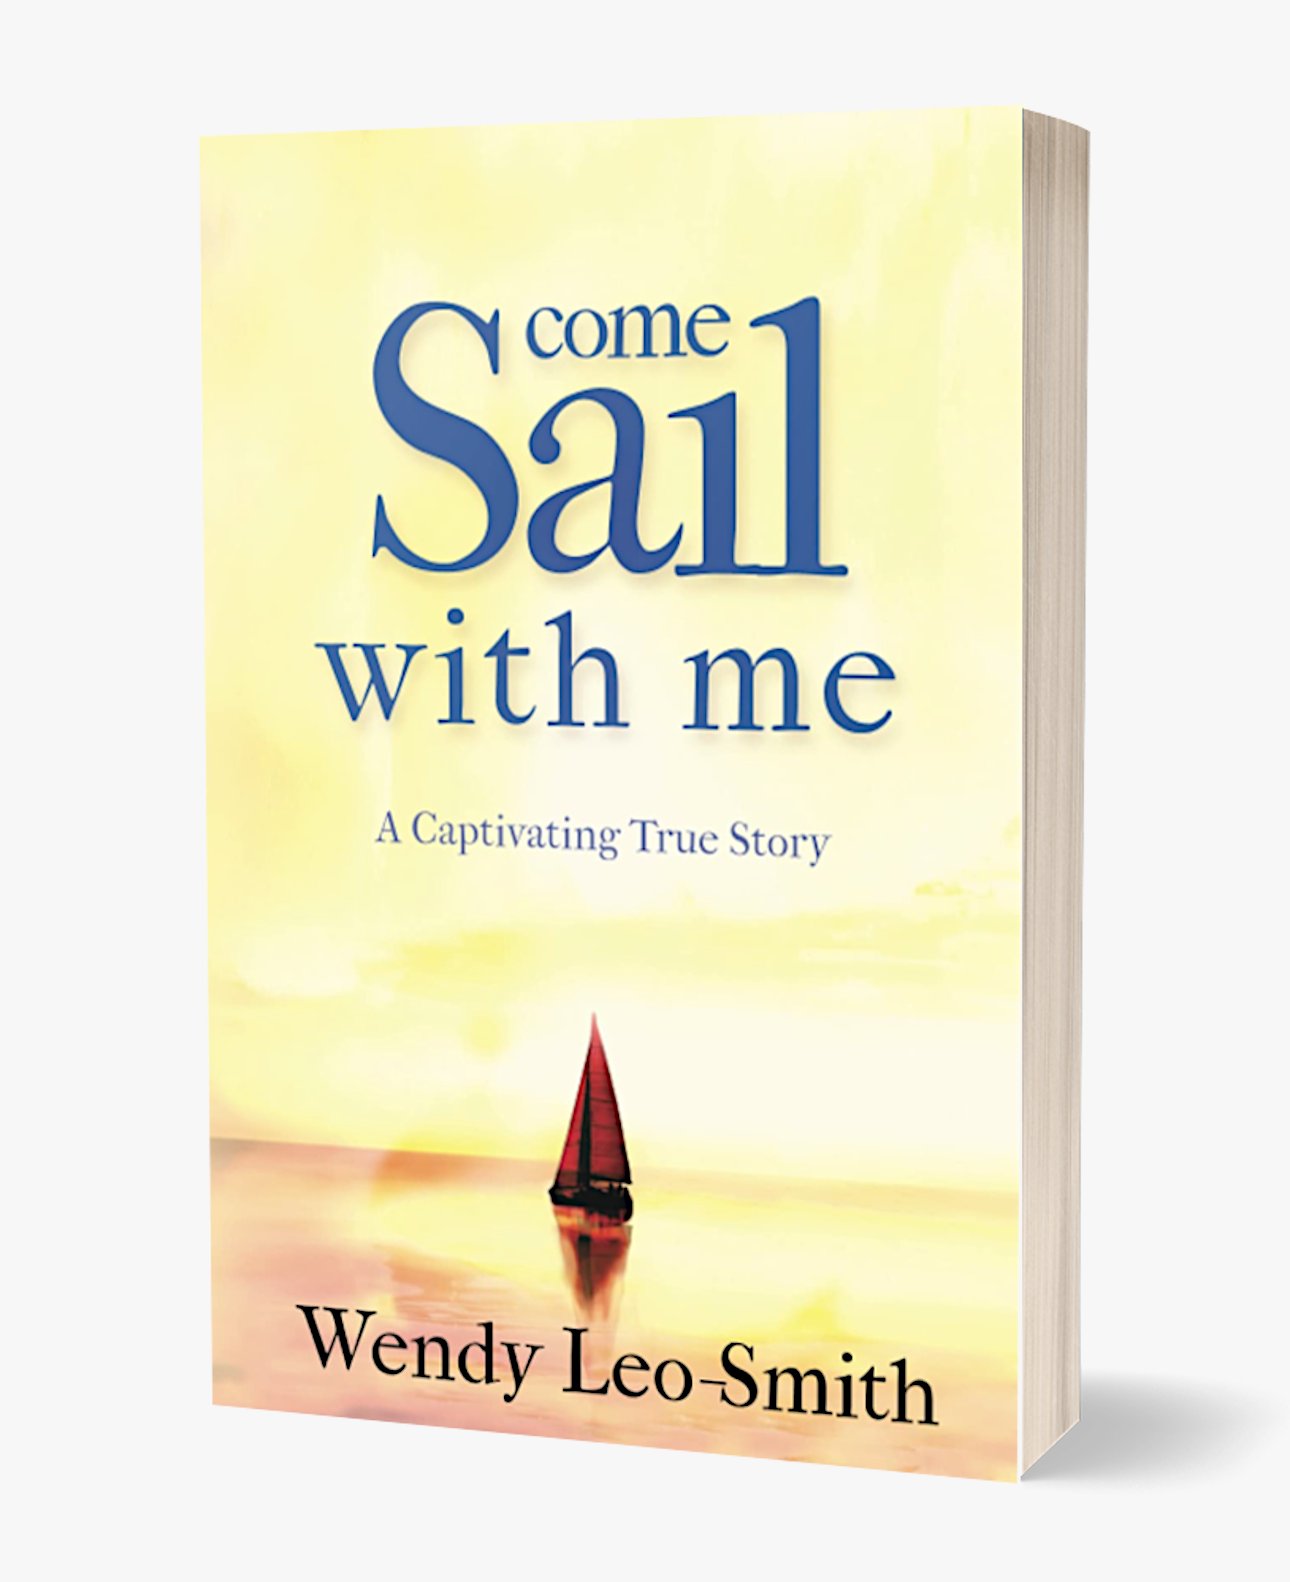 Come sail with me book cover